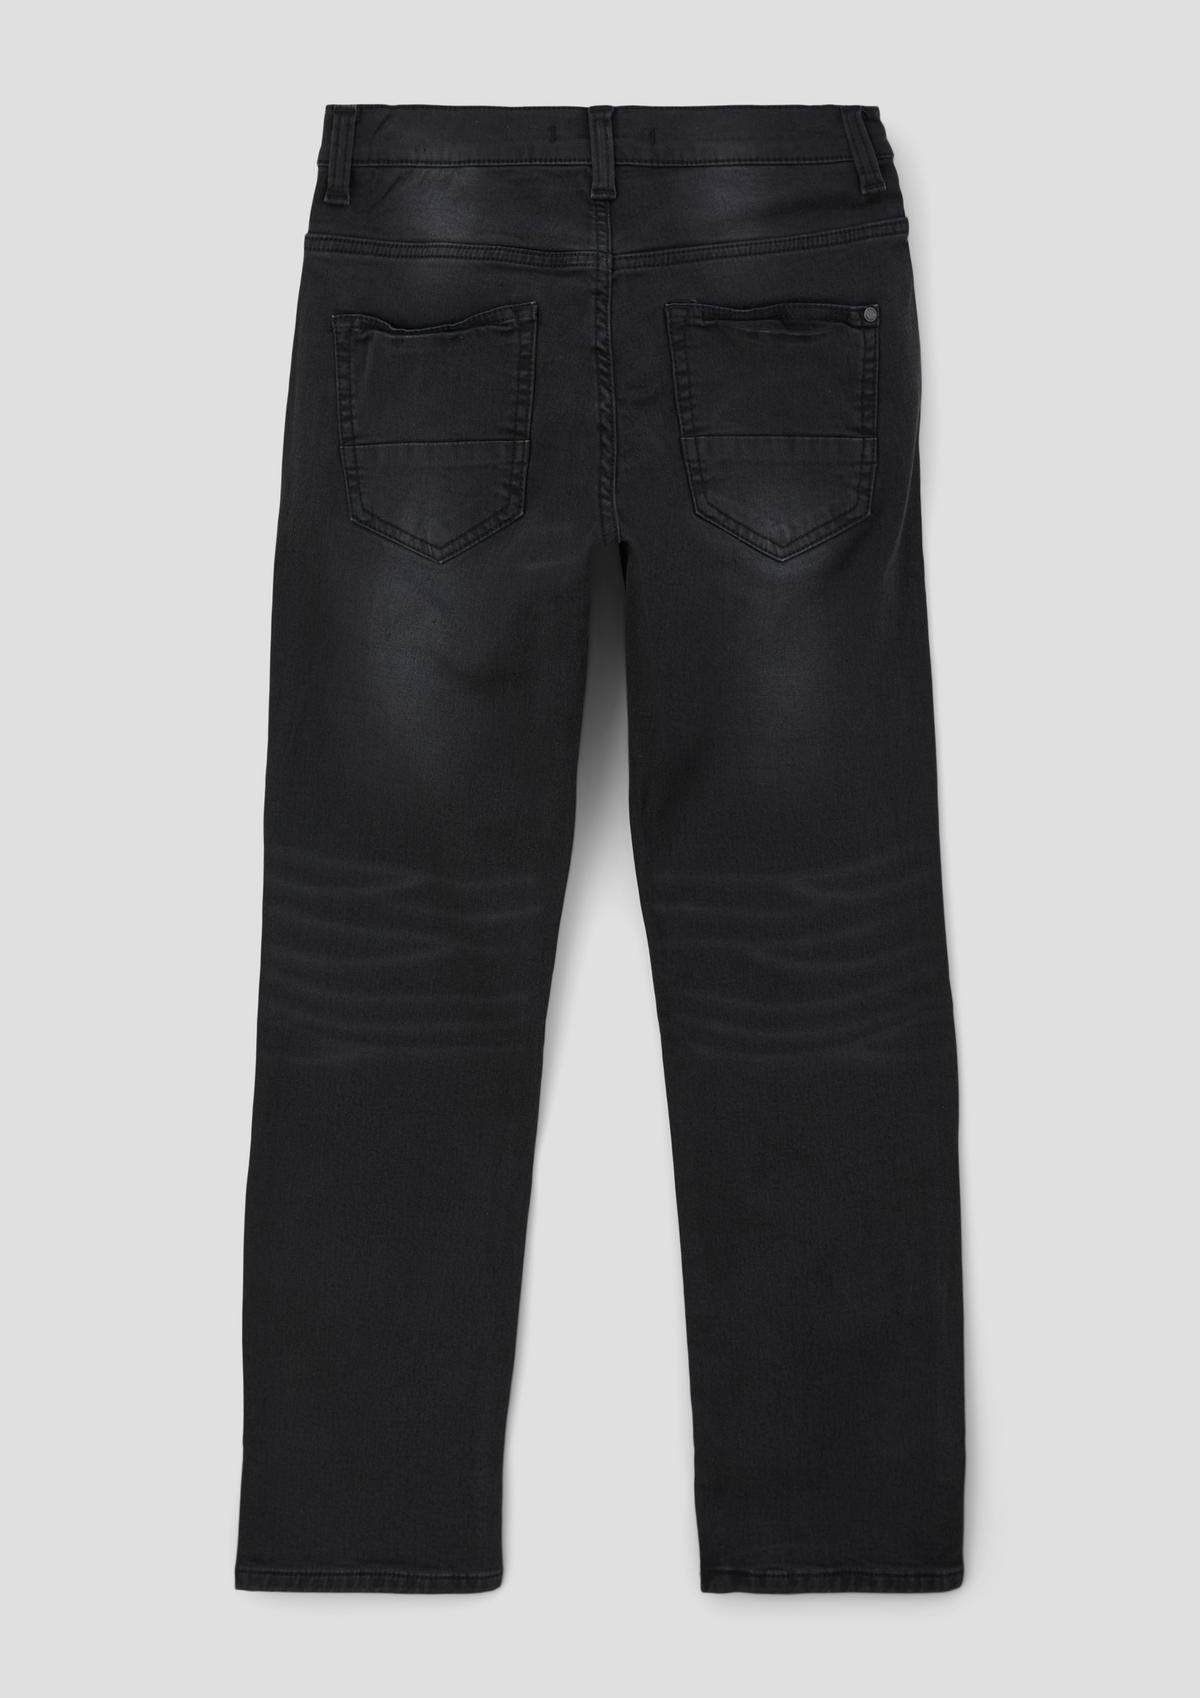 s.Oliver Pete jeans / regular fit / mid rise / straight leg